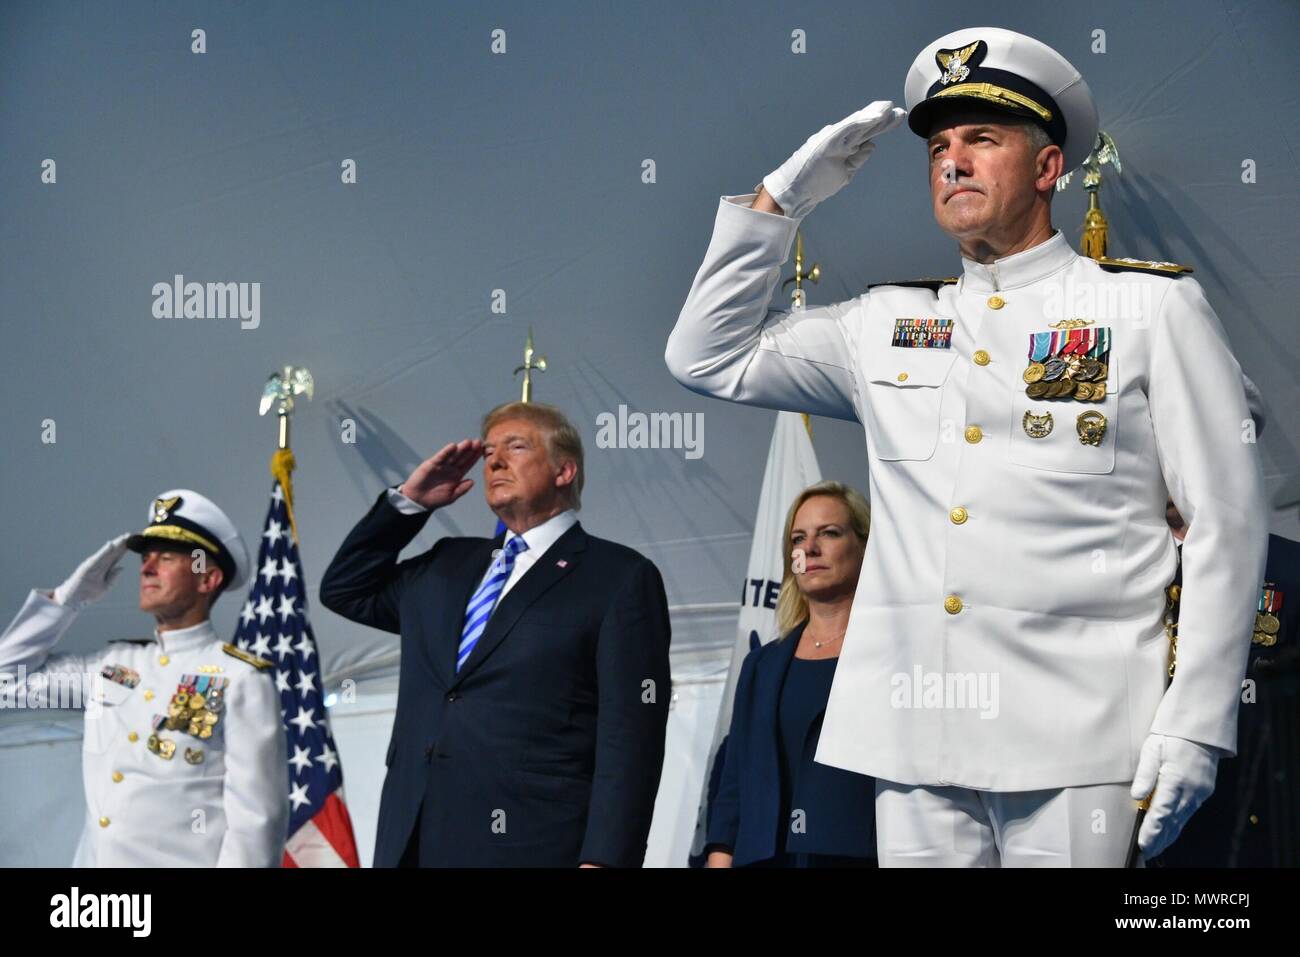 Adm. Paul Zukunft (left), President Donald Trump, Department of Homeland Security Secretary Kirstjen Nielsen and Adm. Karl Schultz render honors during a change of command ceremony at Coast Guard Headquarters in Washington, D.C., June 1, 2018. During the ceremony Schultz relieved Zukunft to become the 26th commandant of the Coast Guard. U.S. Coast Guard photo by Petty Officer 1st Class Patrick Kelley. Stock Photo